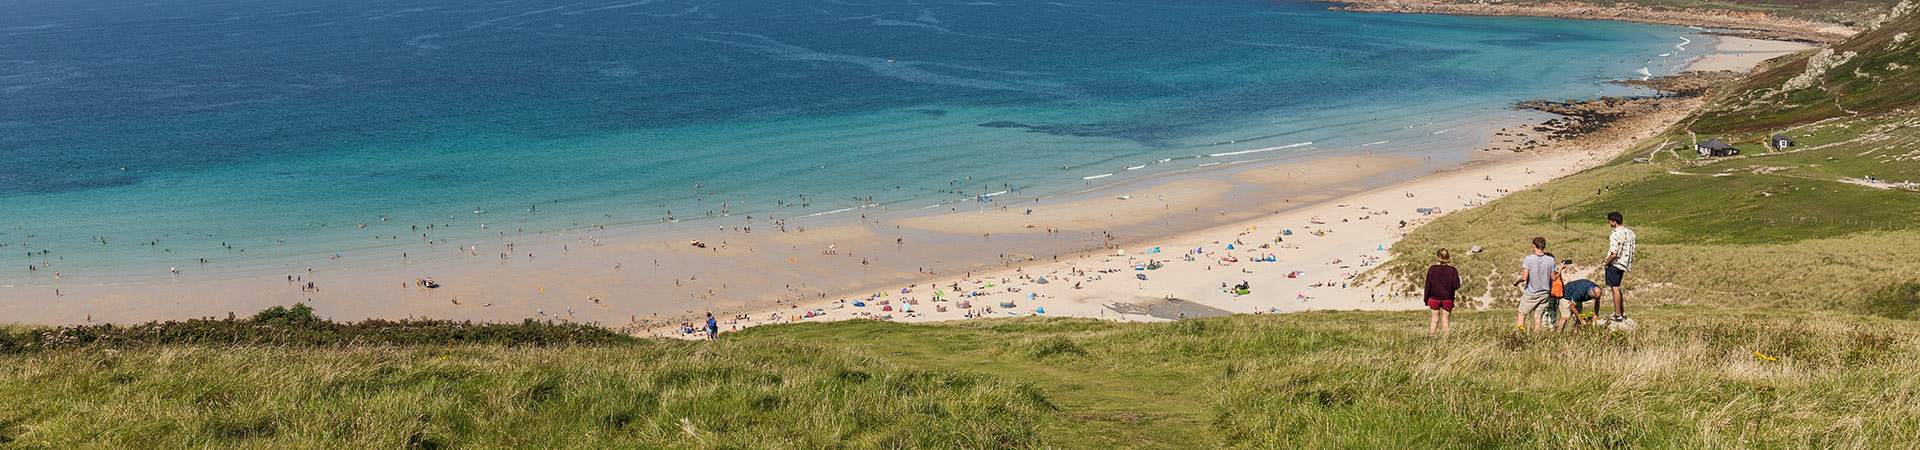 Things to do in Sennen